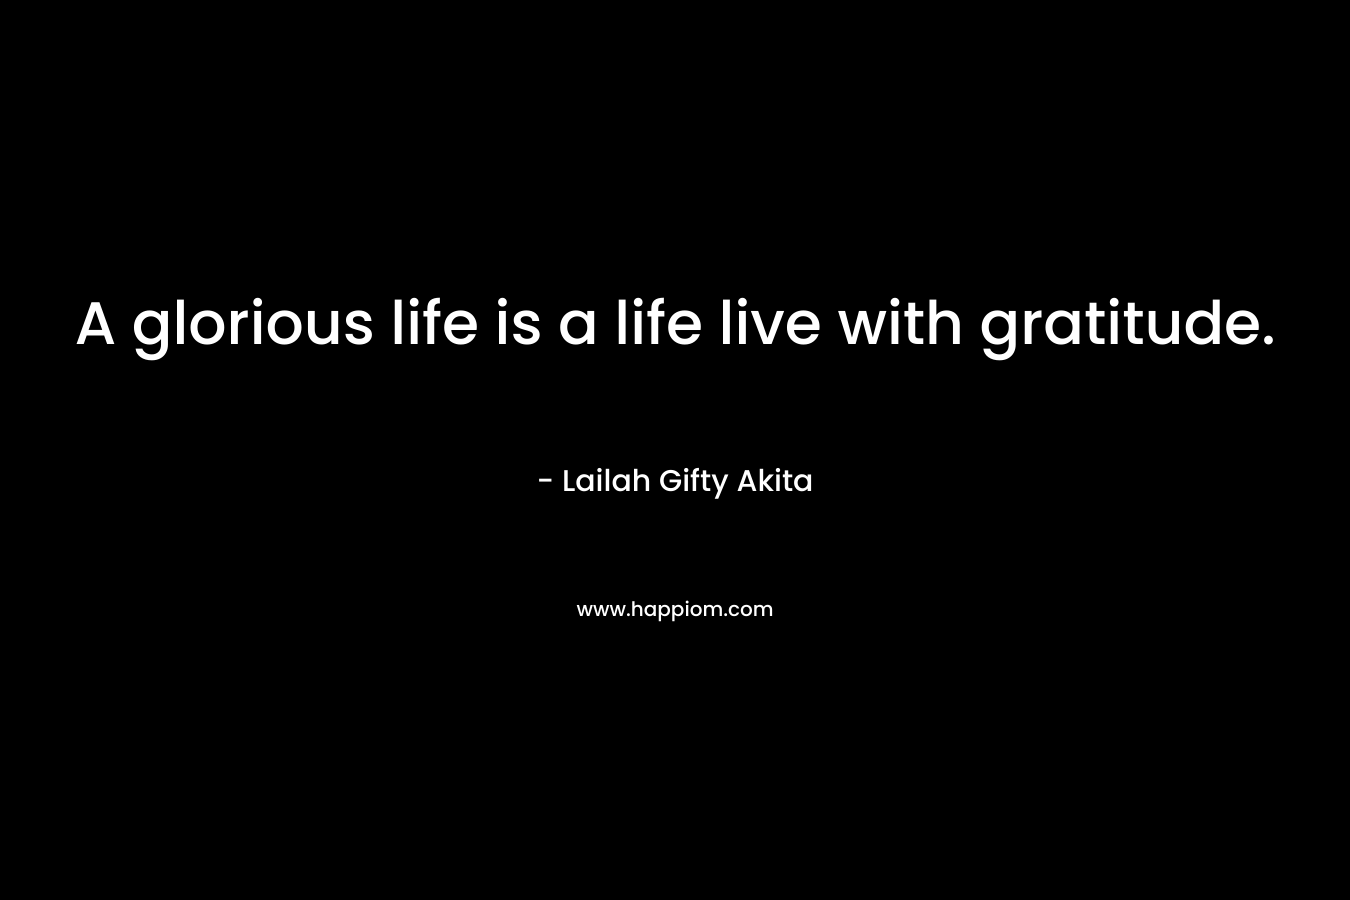 A glorious life is a life live with gratitude.